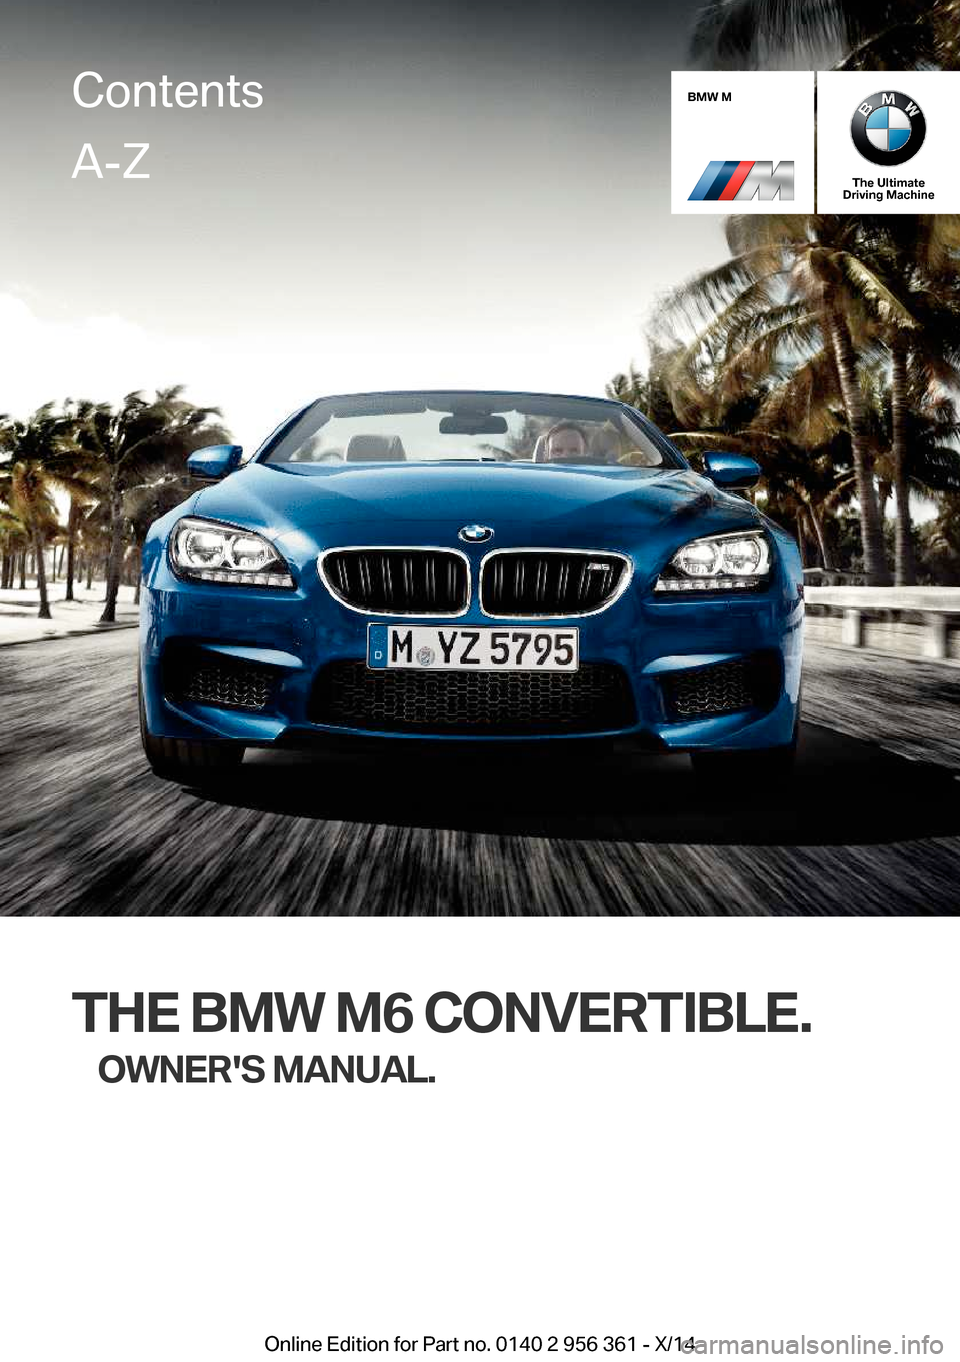 BMW M6 CONVERTIBLE 2014 F12M Owners Manual BMW M
The Ultimate
Driving Machine
THE BMW M6 CONVERTIBLE.
OWNERS MANUAL.
ContentsA-Z
Online Edition for Part no. 0140 2 956 361 - X/14   